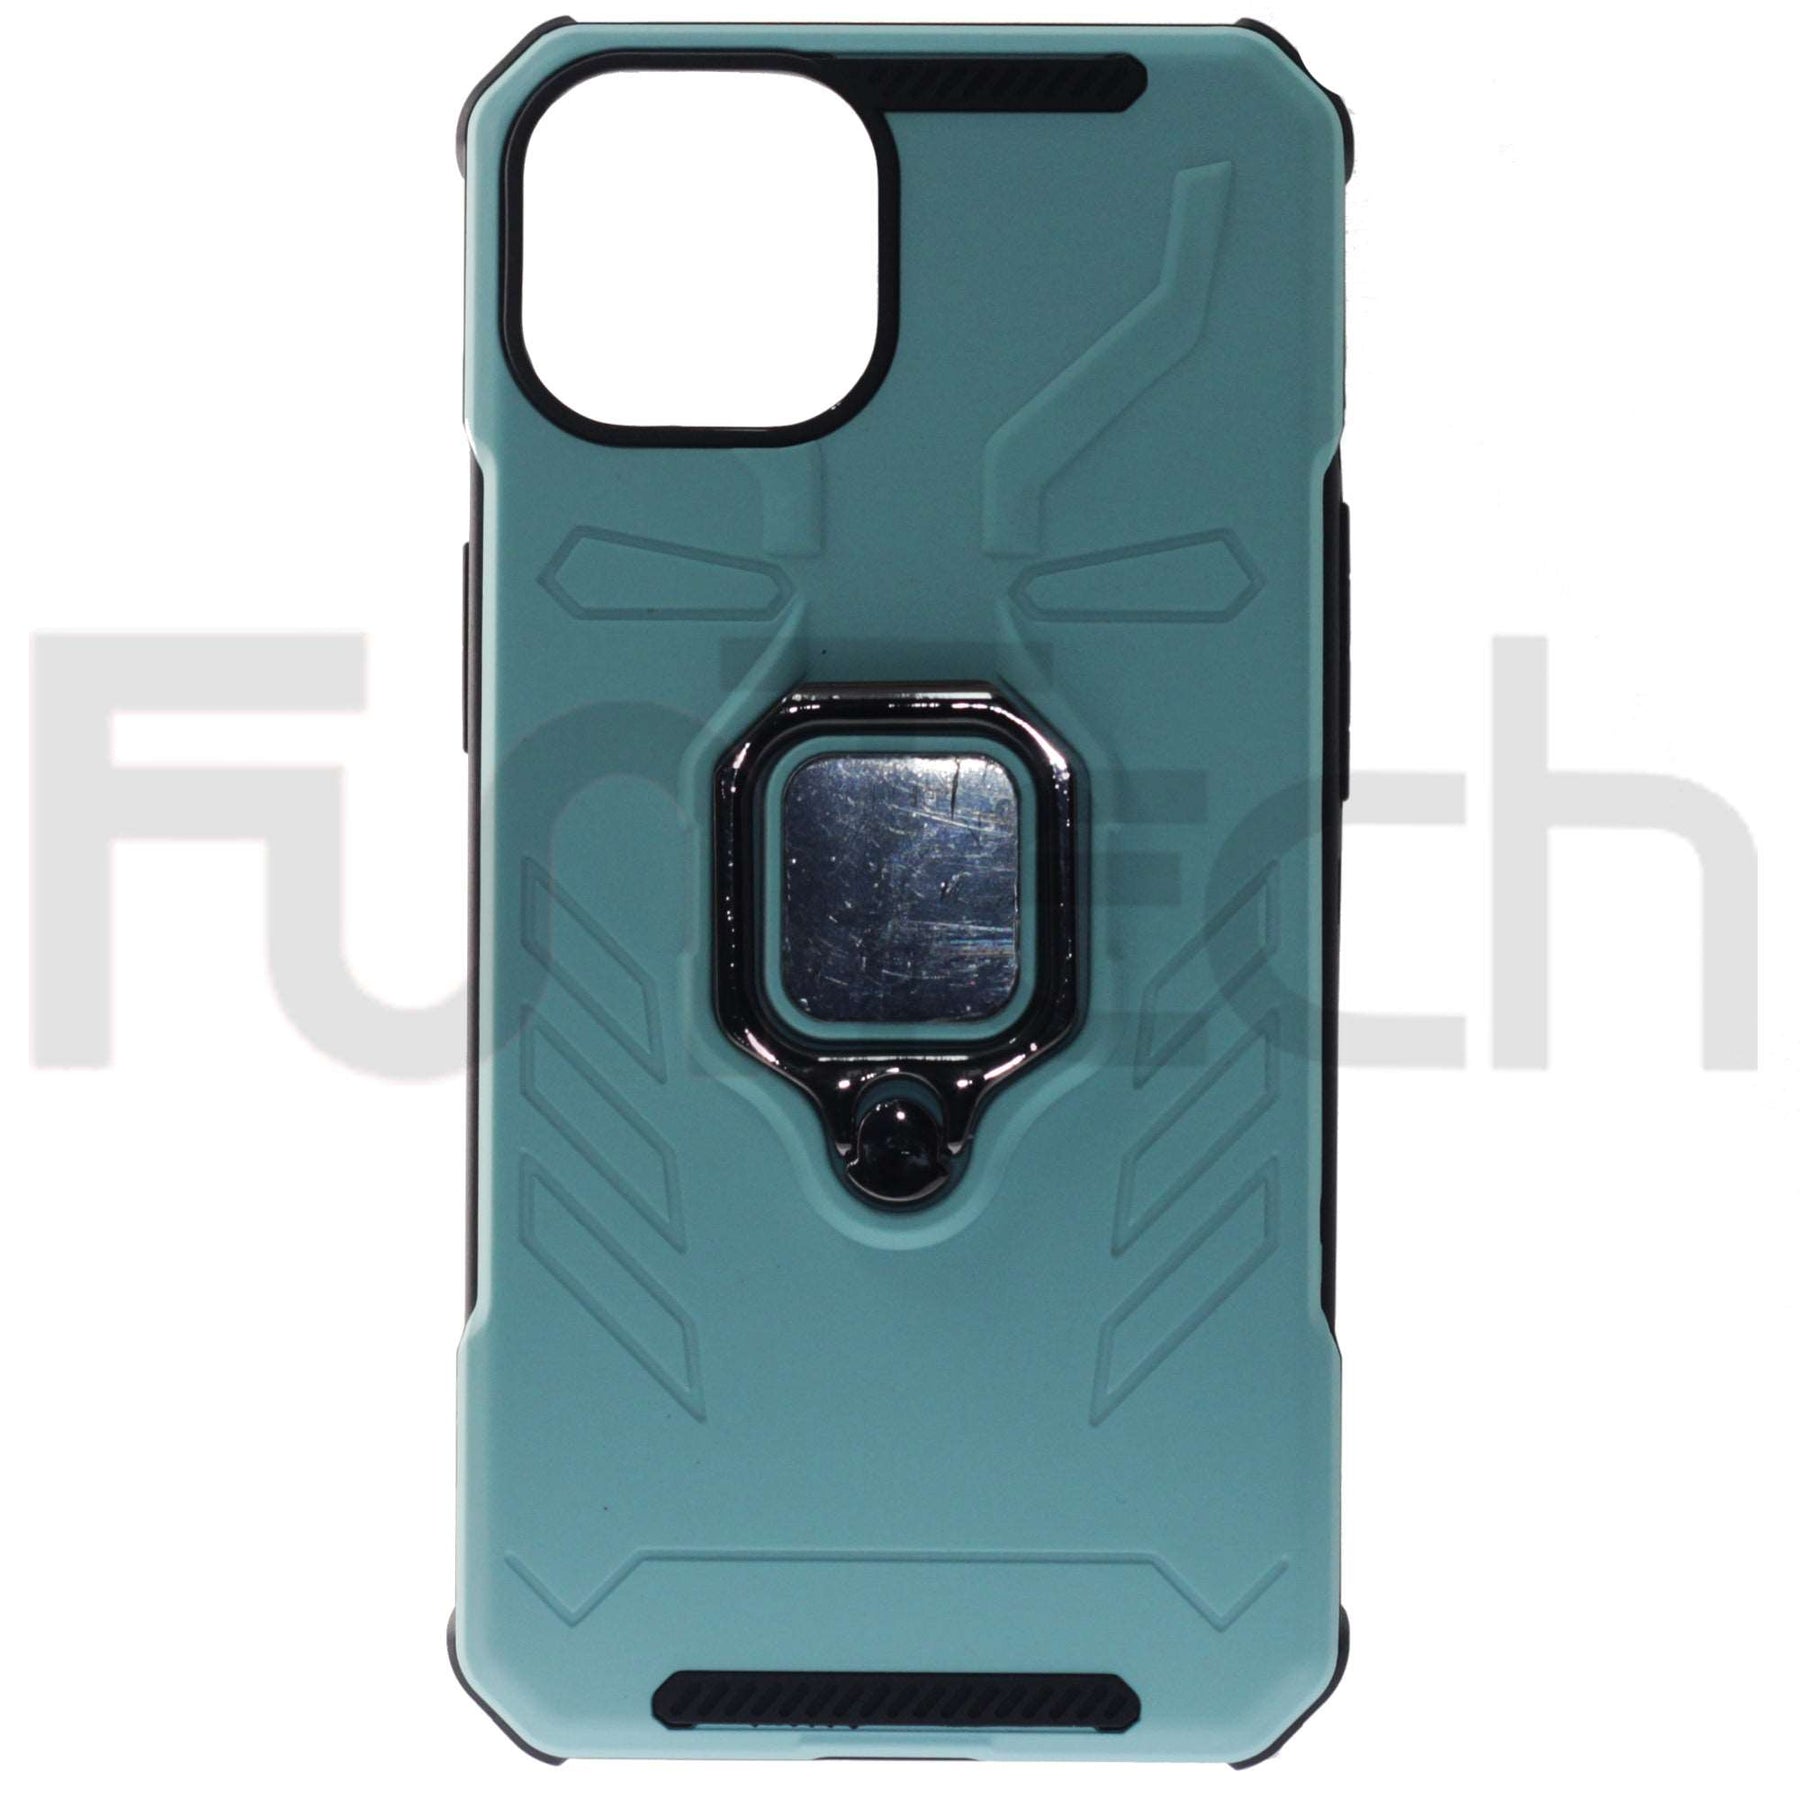 Apple iPhone 13, Ring Armor Case, Color Teal.